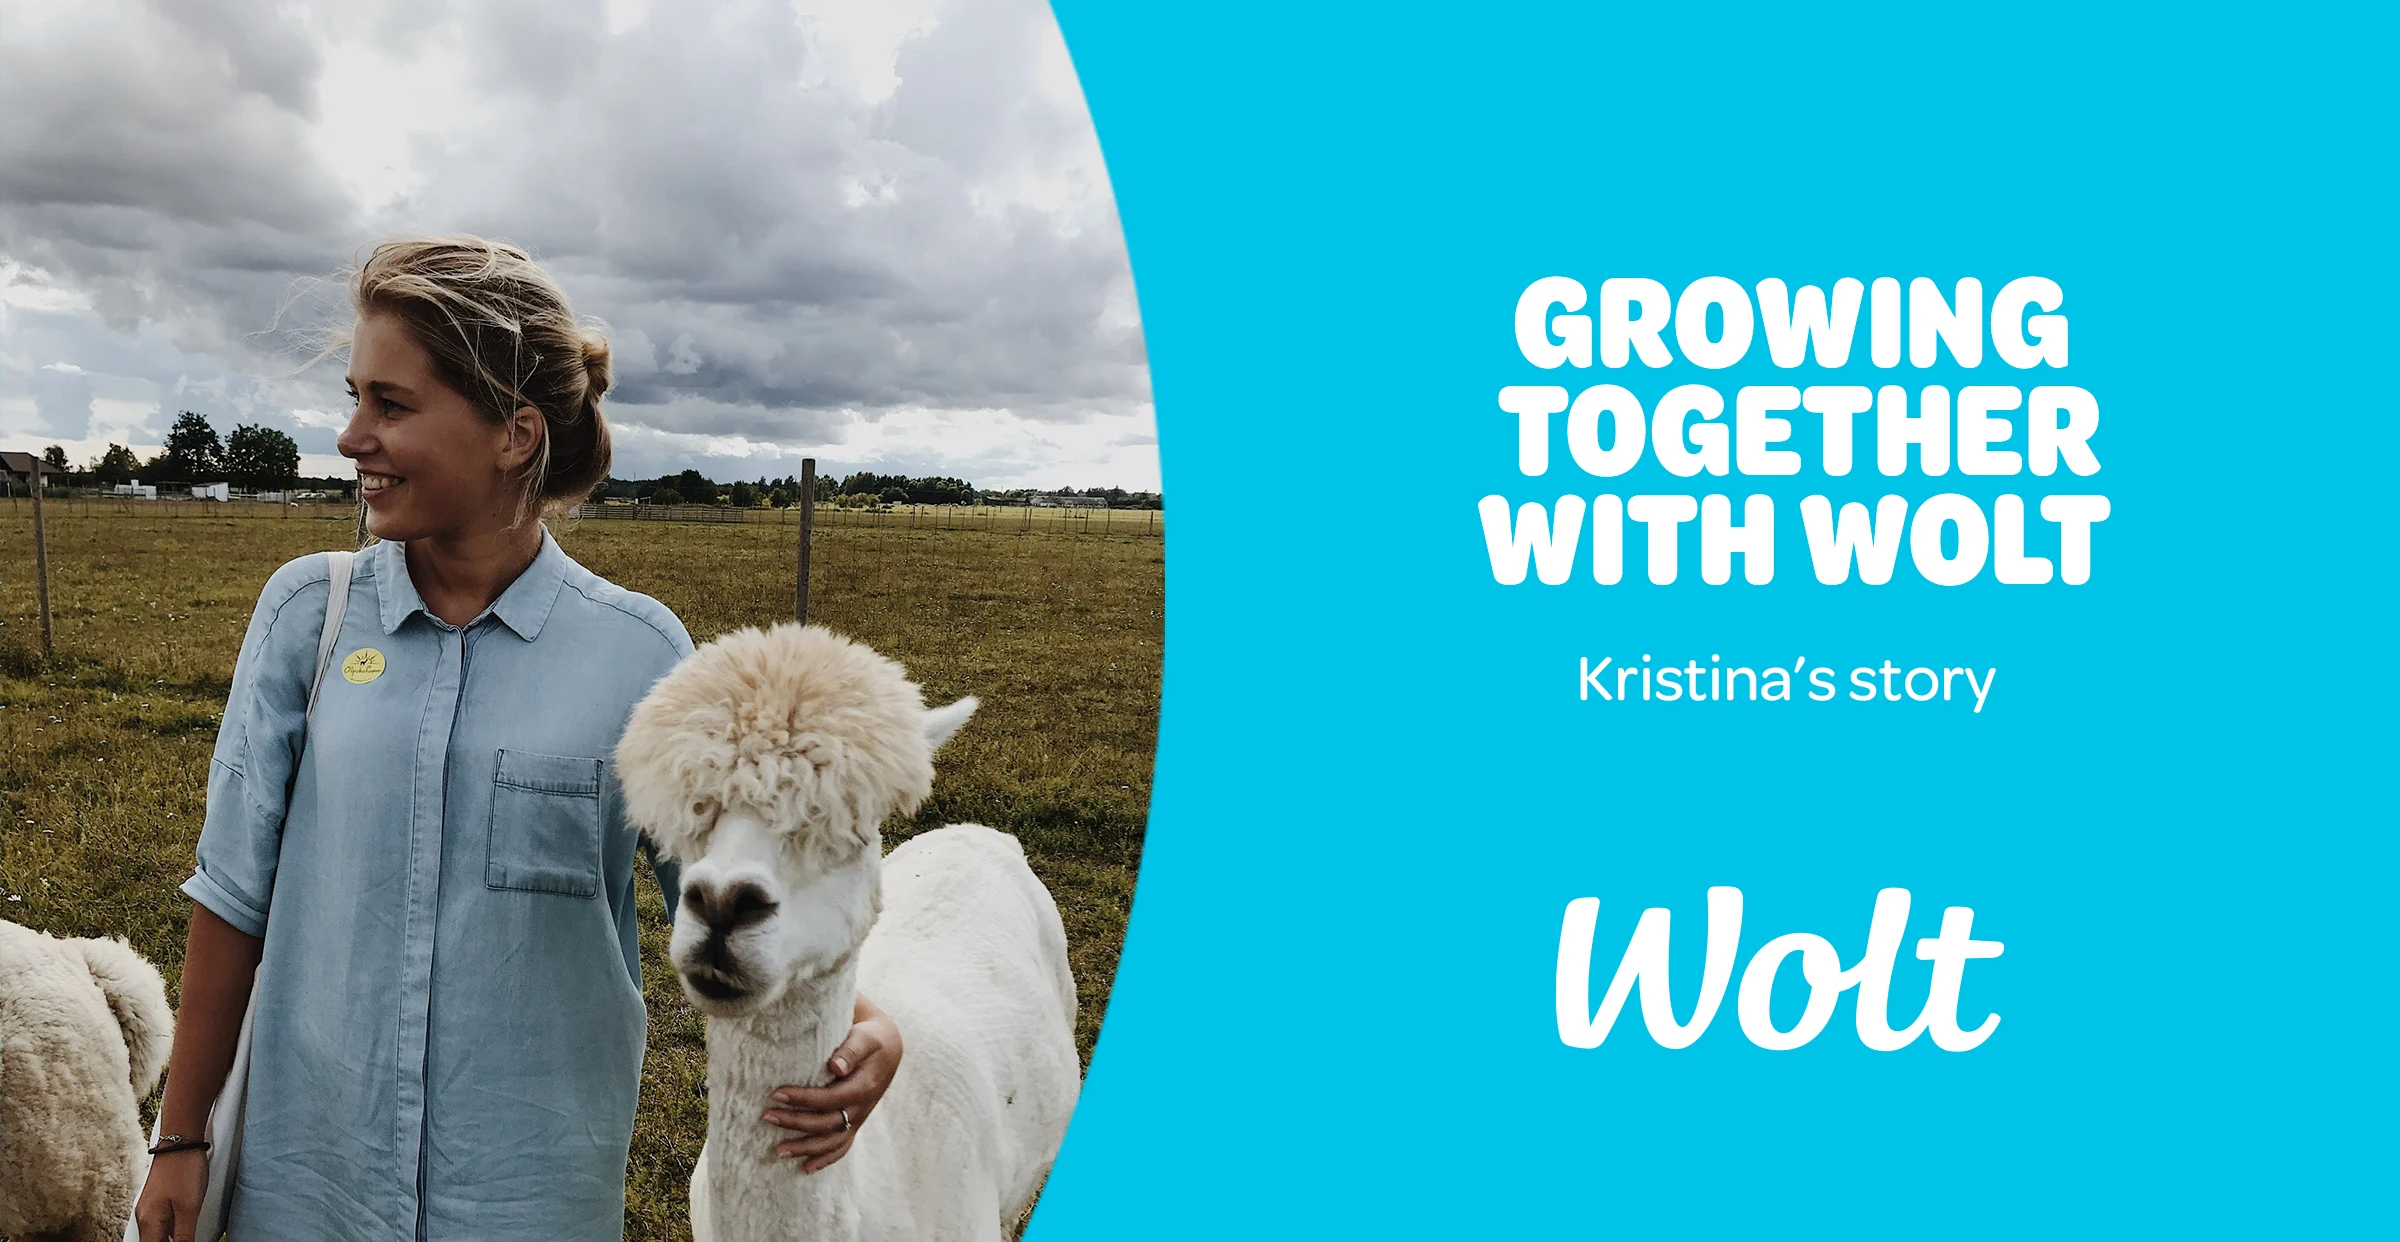 Growing together with Wolt - Kristina’s story